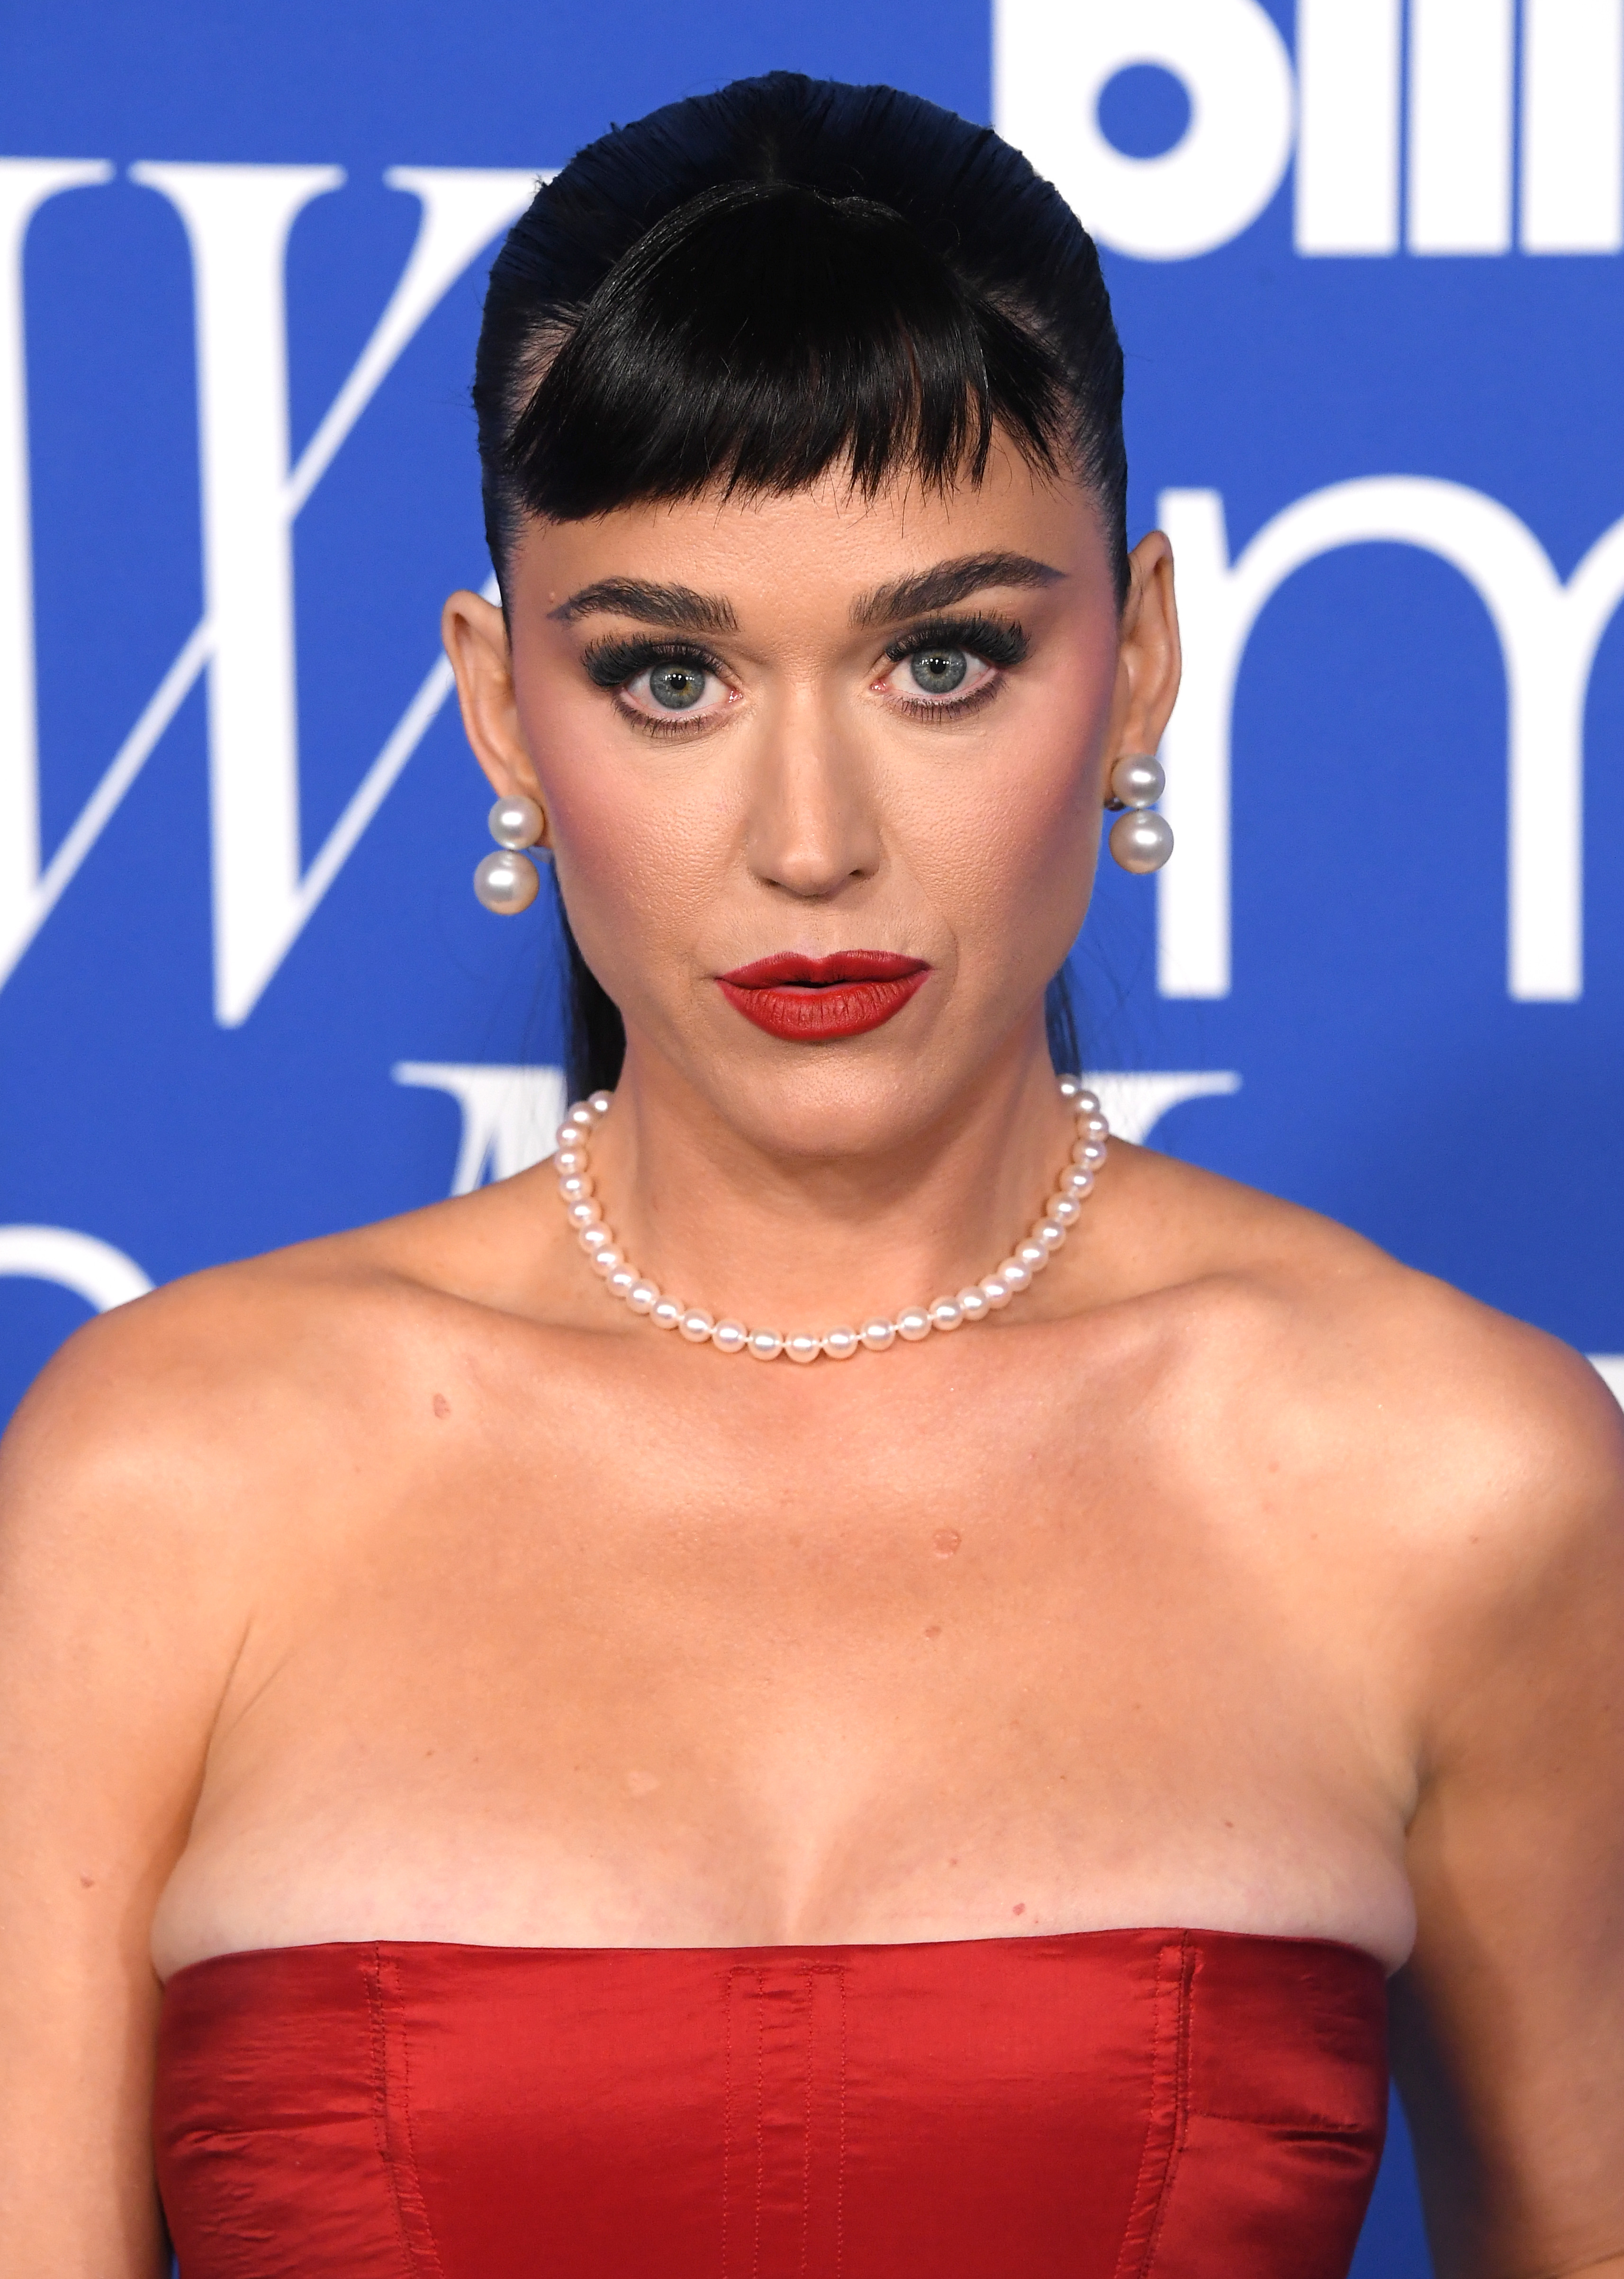 Katy's fans gushed over her sense of humor in the comments